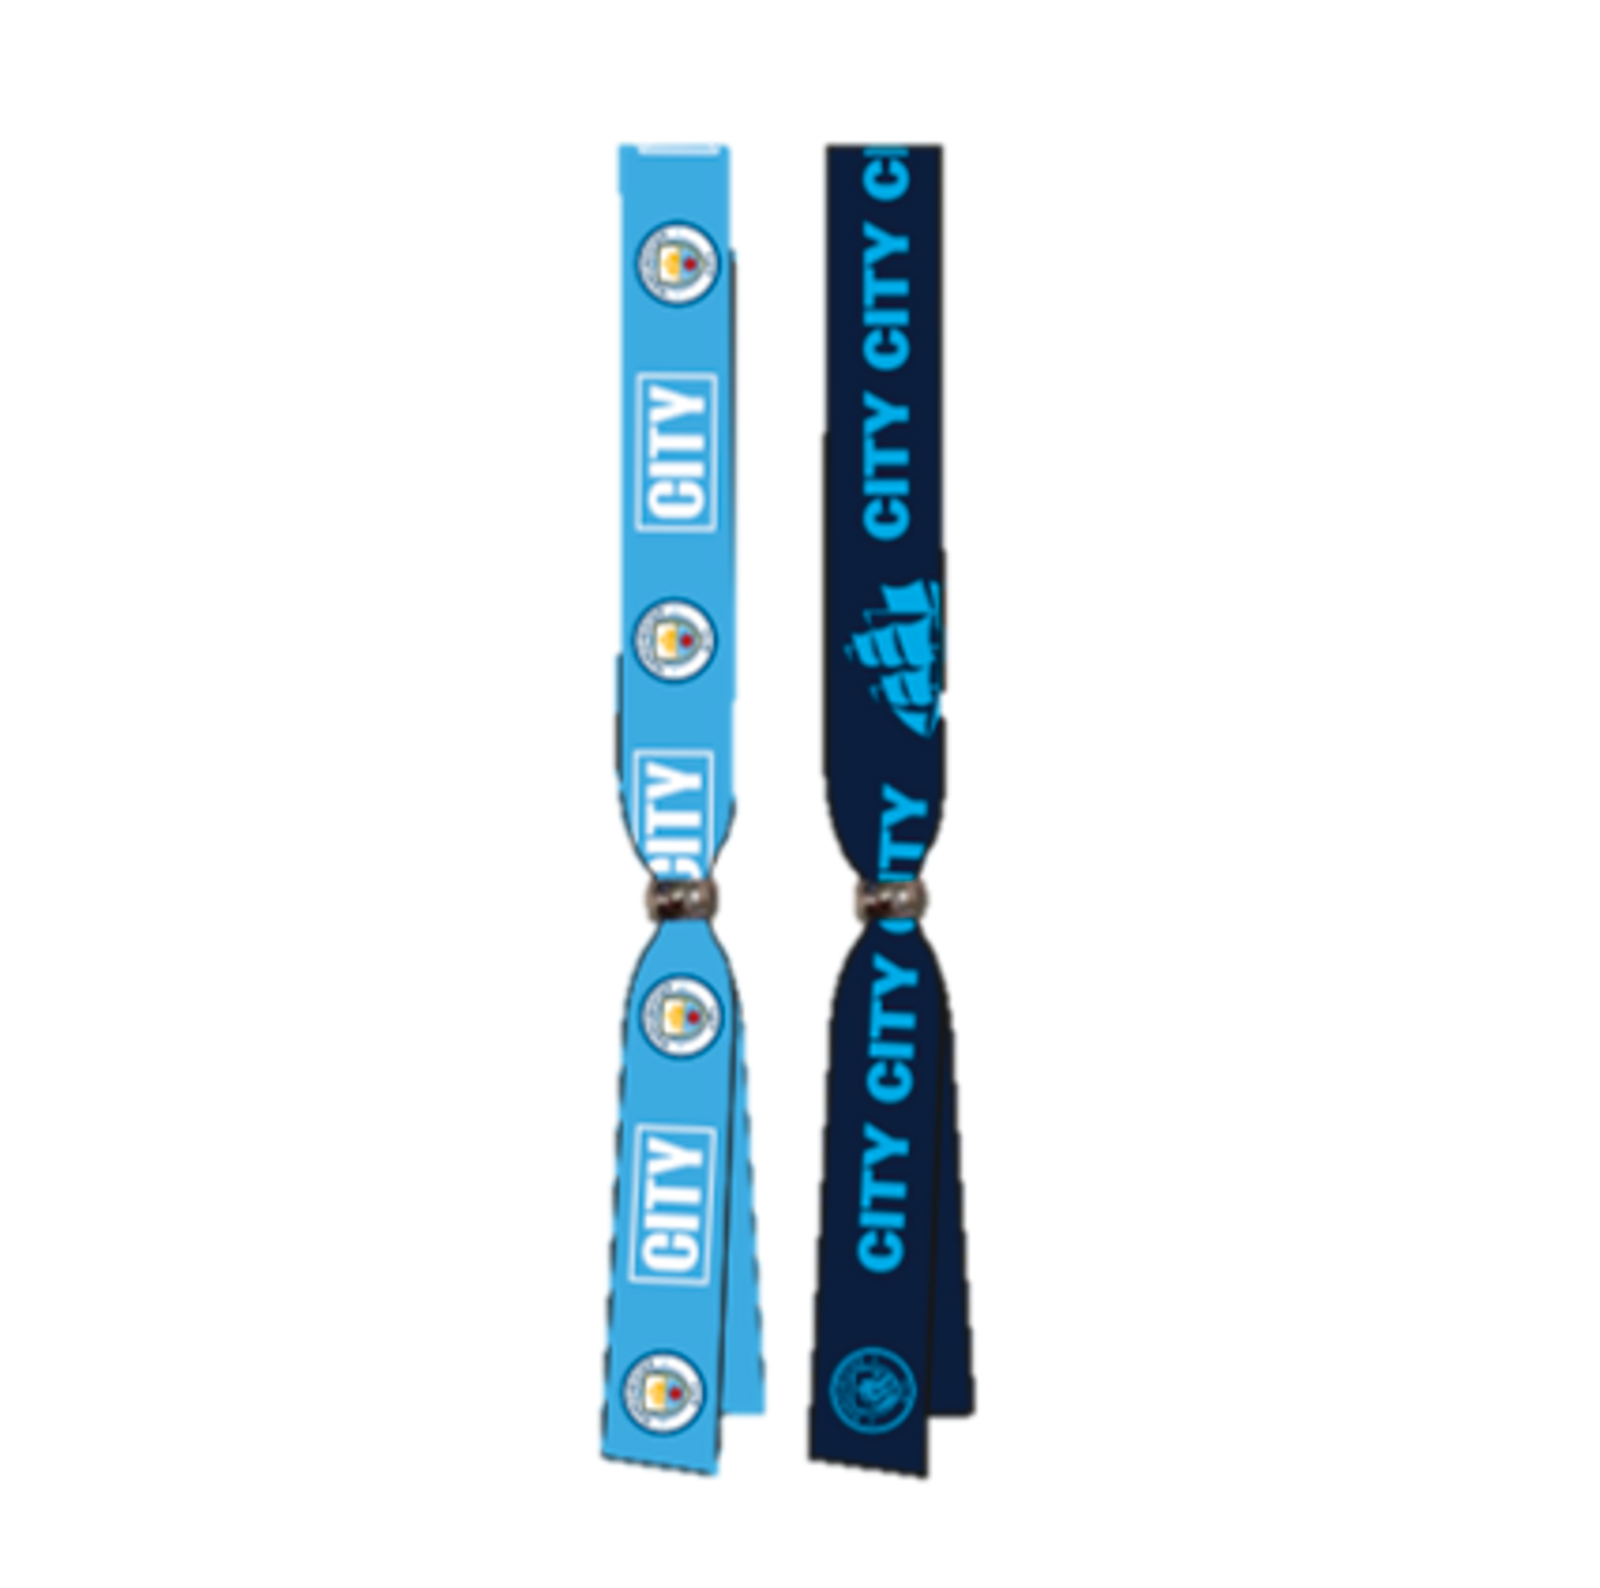 Manchester City FC Official Silicone Wristband (One Size) (Sky Blue)